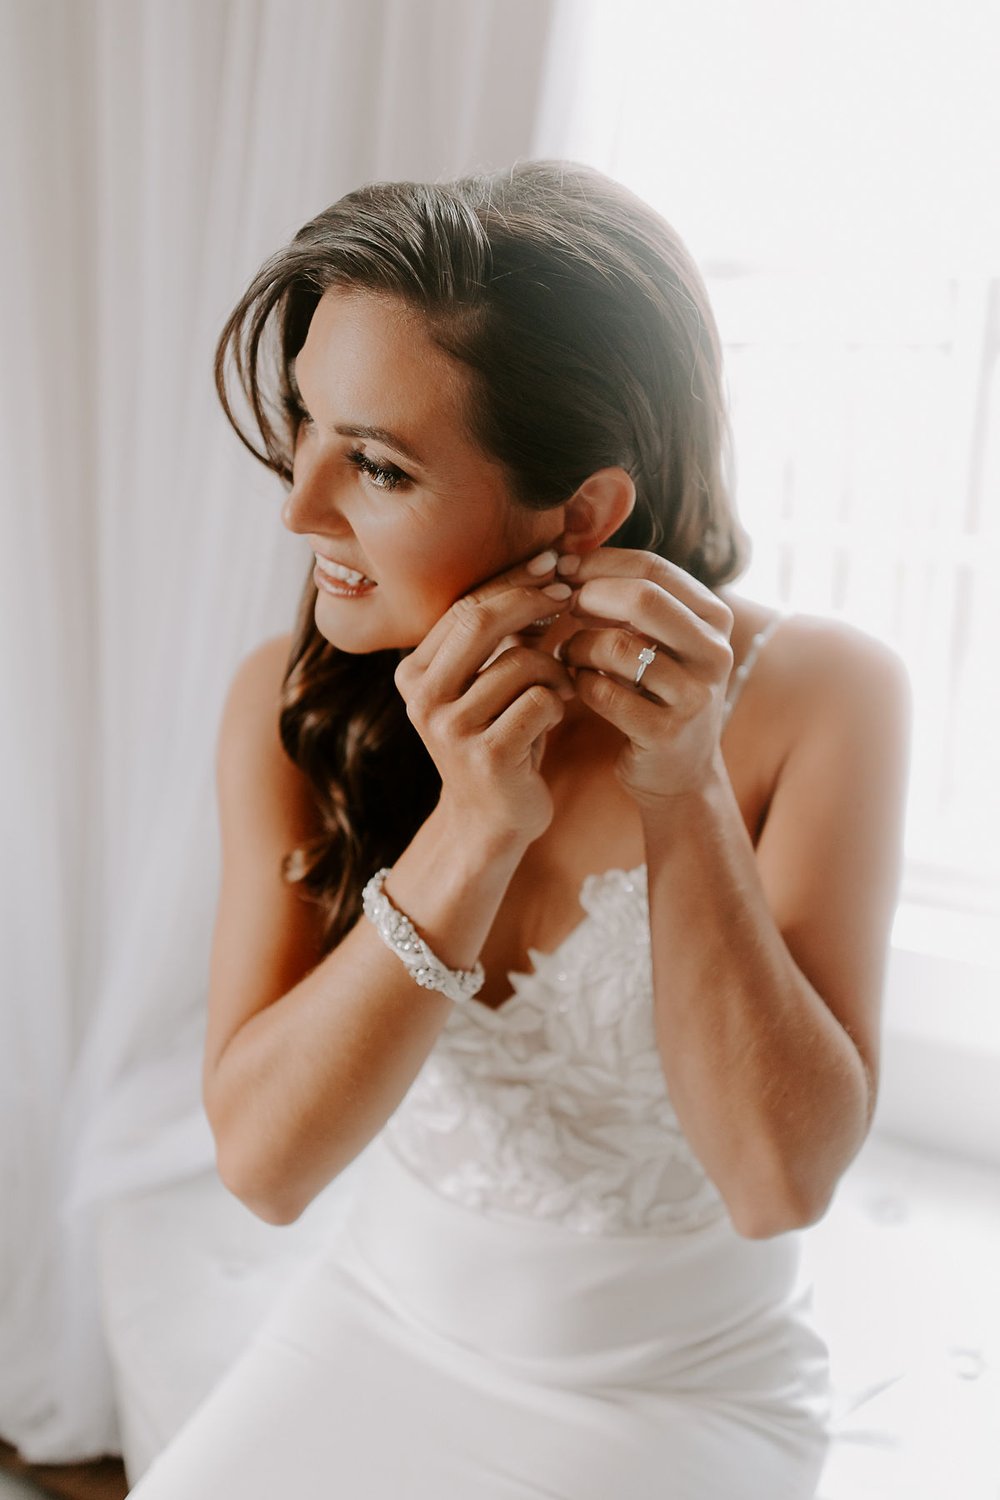 Bride puts on earrings as she gets ready for wedding day